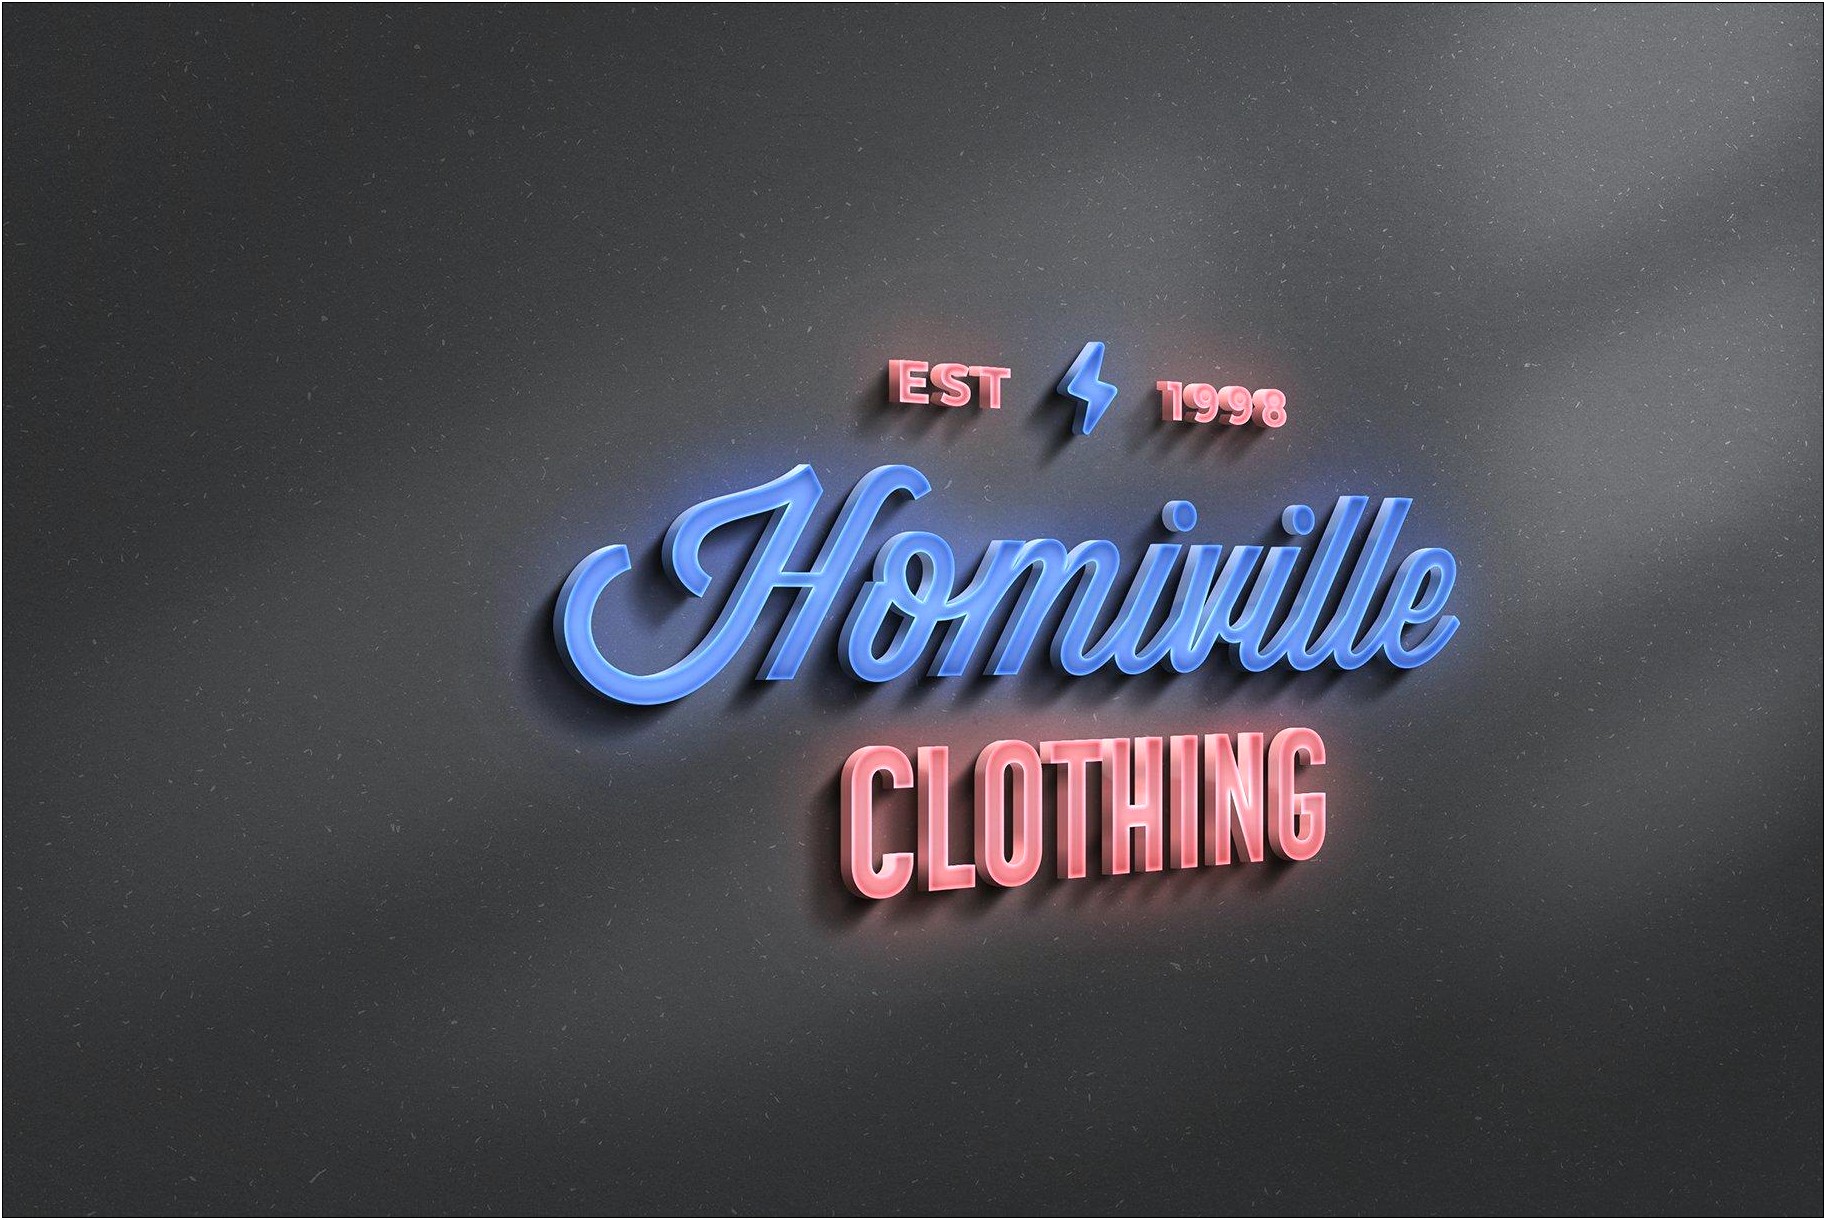 Cinema 4d Neon Sign Template Free